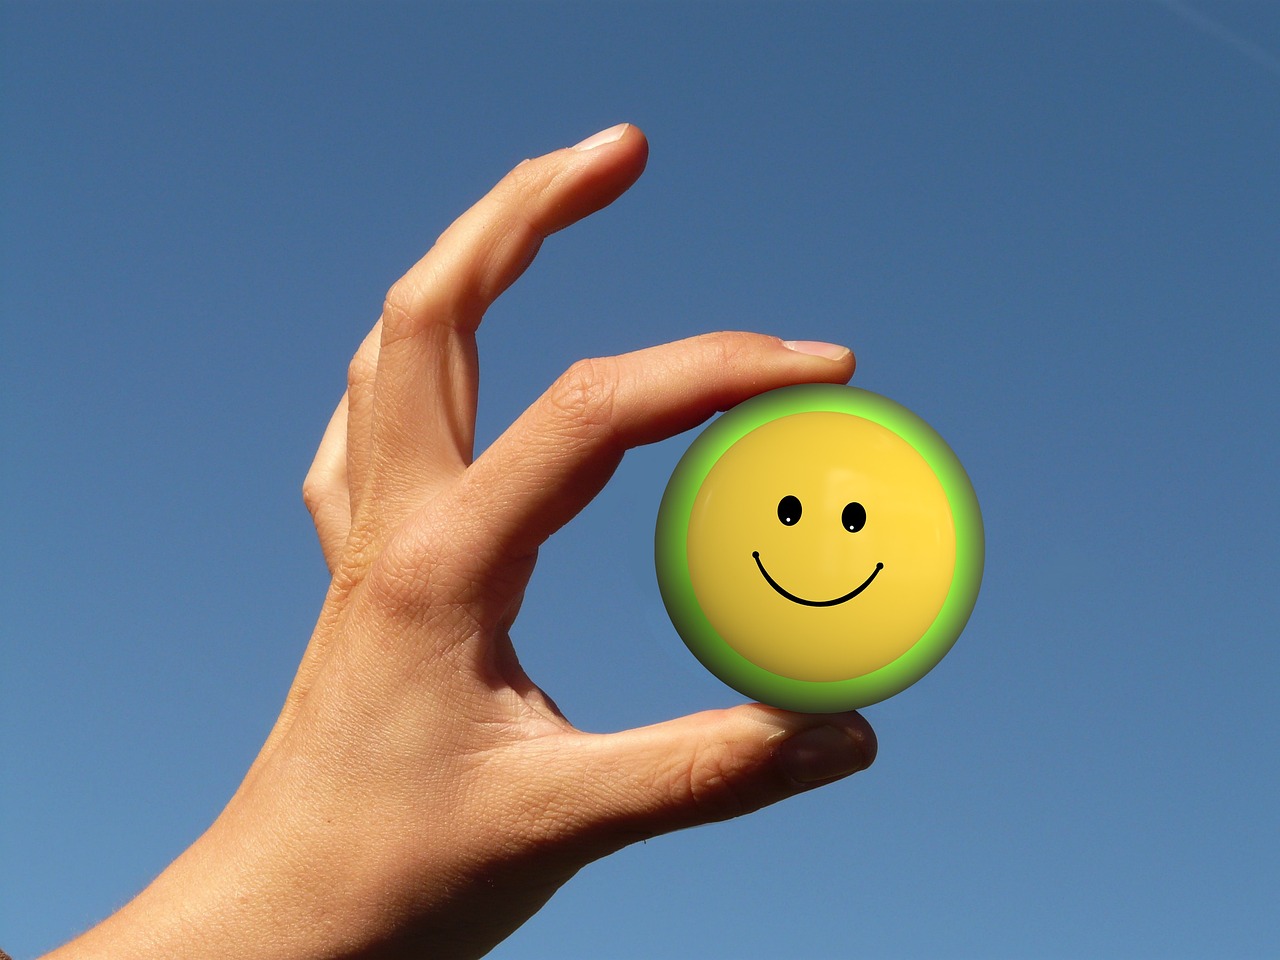 a person holding a smiley face ball in their hand, a picture, by Jan Rustem, precisionism, cad, very very happy!, a green, everyday plain object